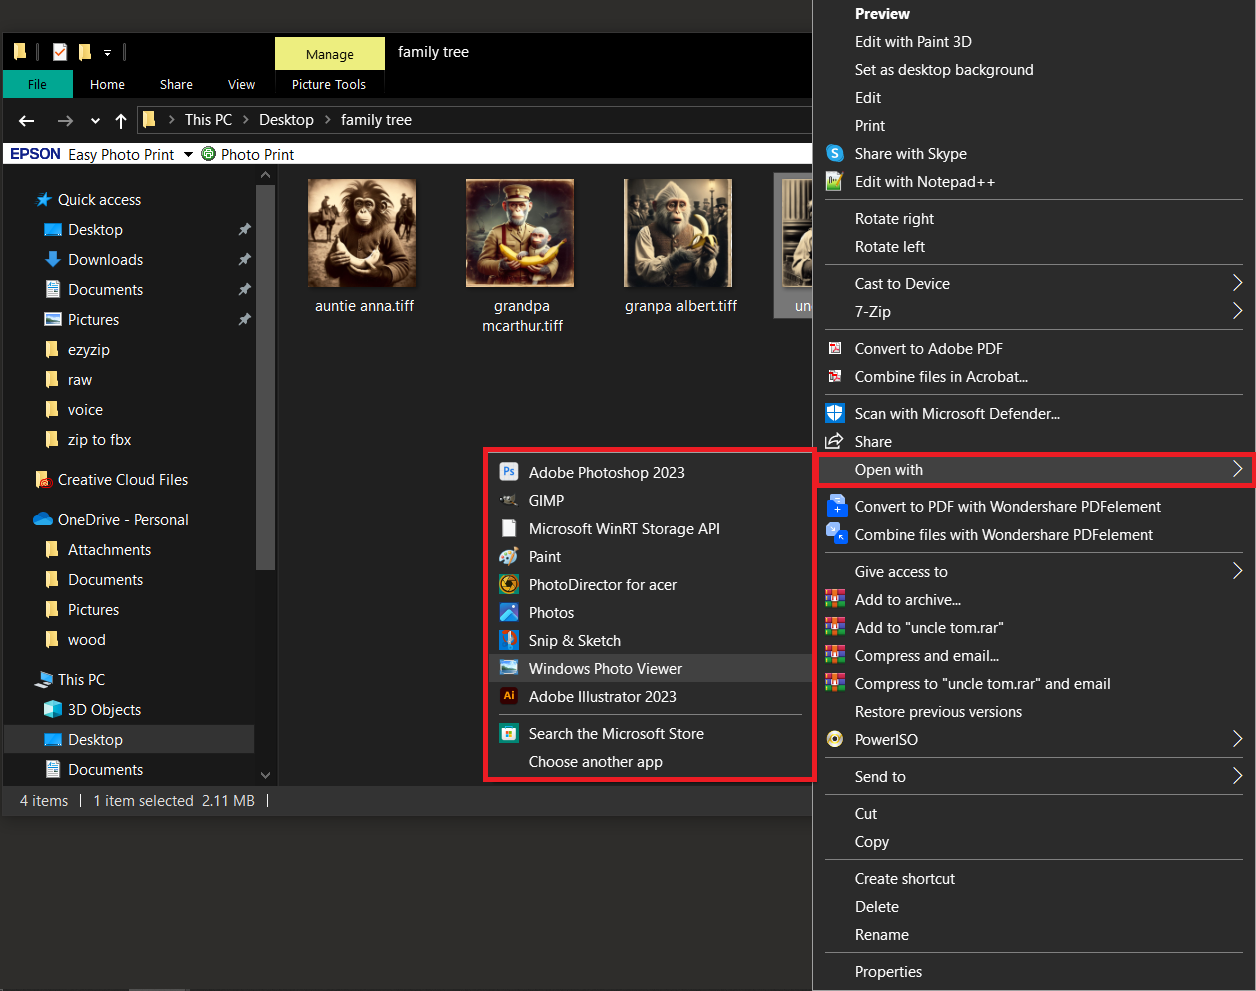 How To View Old Photo Files on Windows: Step 4